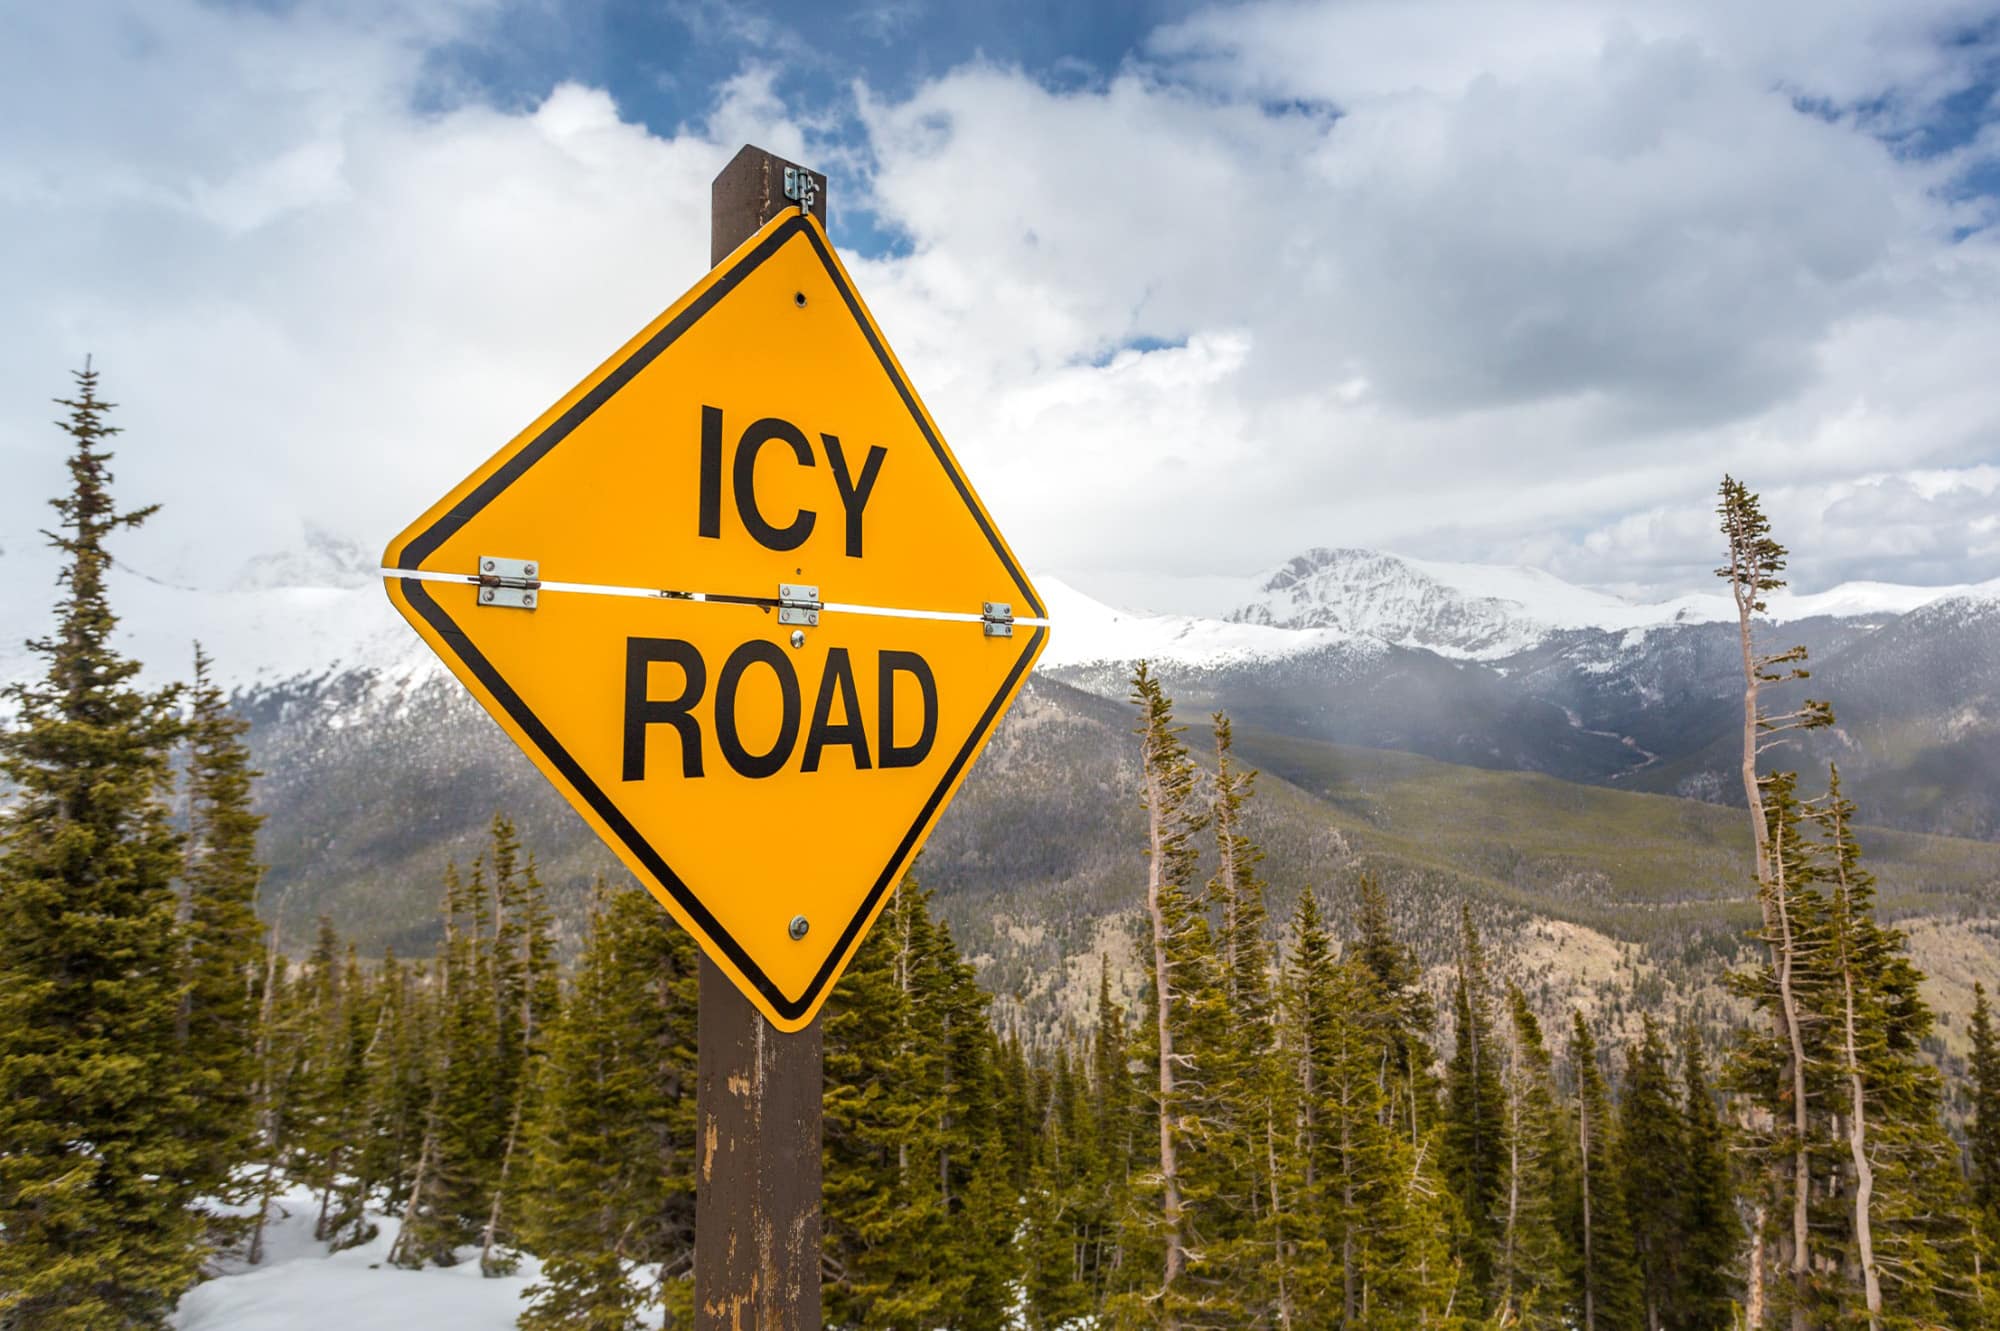 Icy road sign - Navigating Icy/Snowy Roads